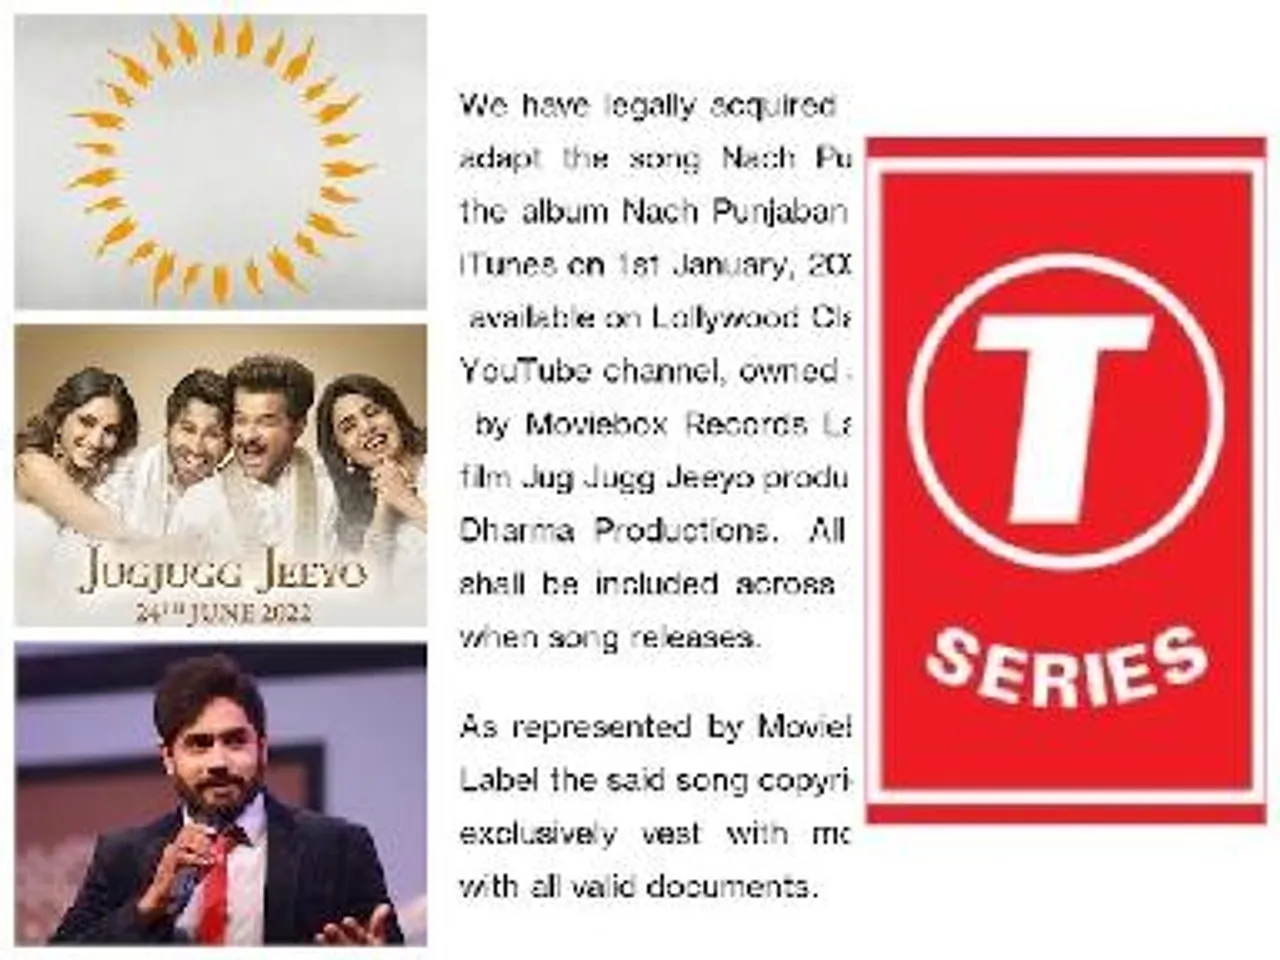 T-Series Issues A Statement Over Nach Punjaban Song Controversy